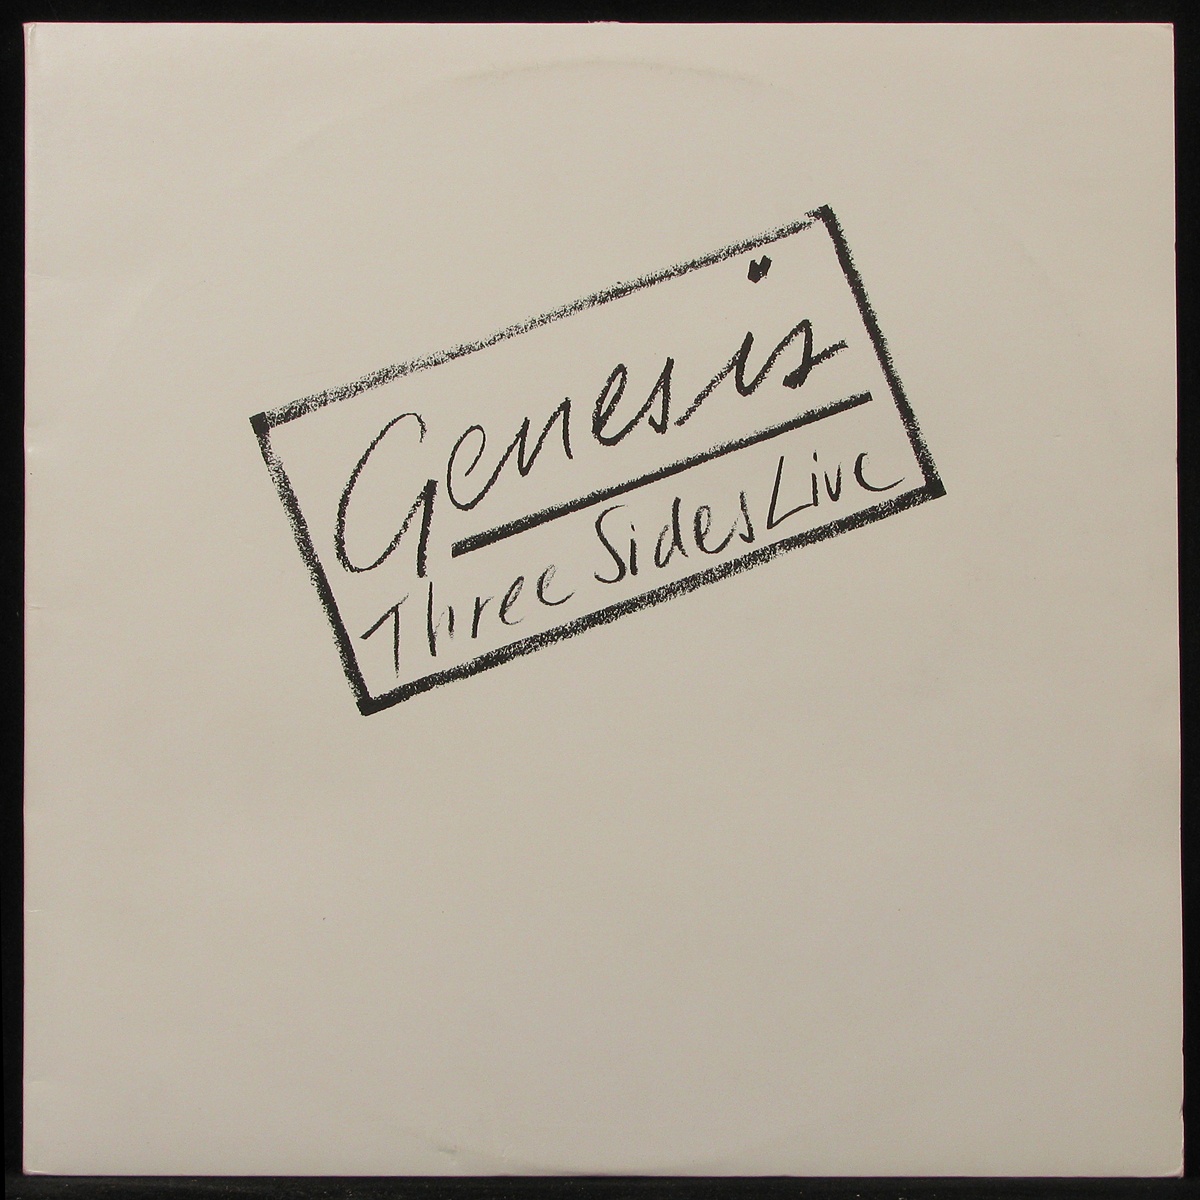 Three sides. Genesis three Sides Live 1982. Charisma пластинка. Genesis - three Sides Live (1982)DVD. …And then there were three… Genesis.